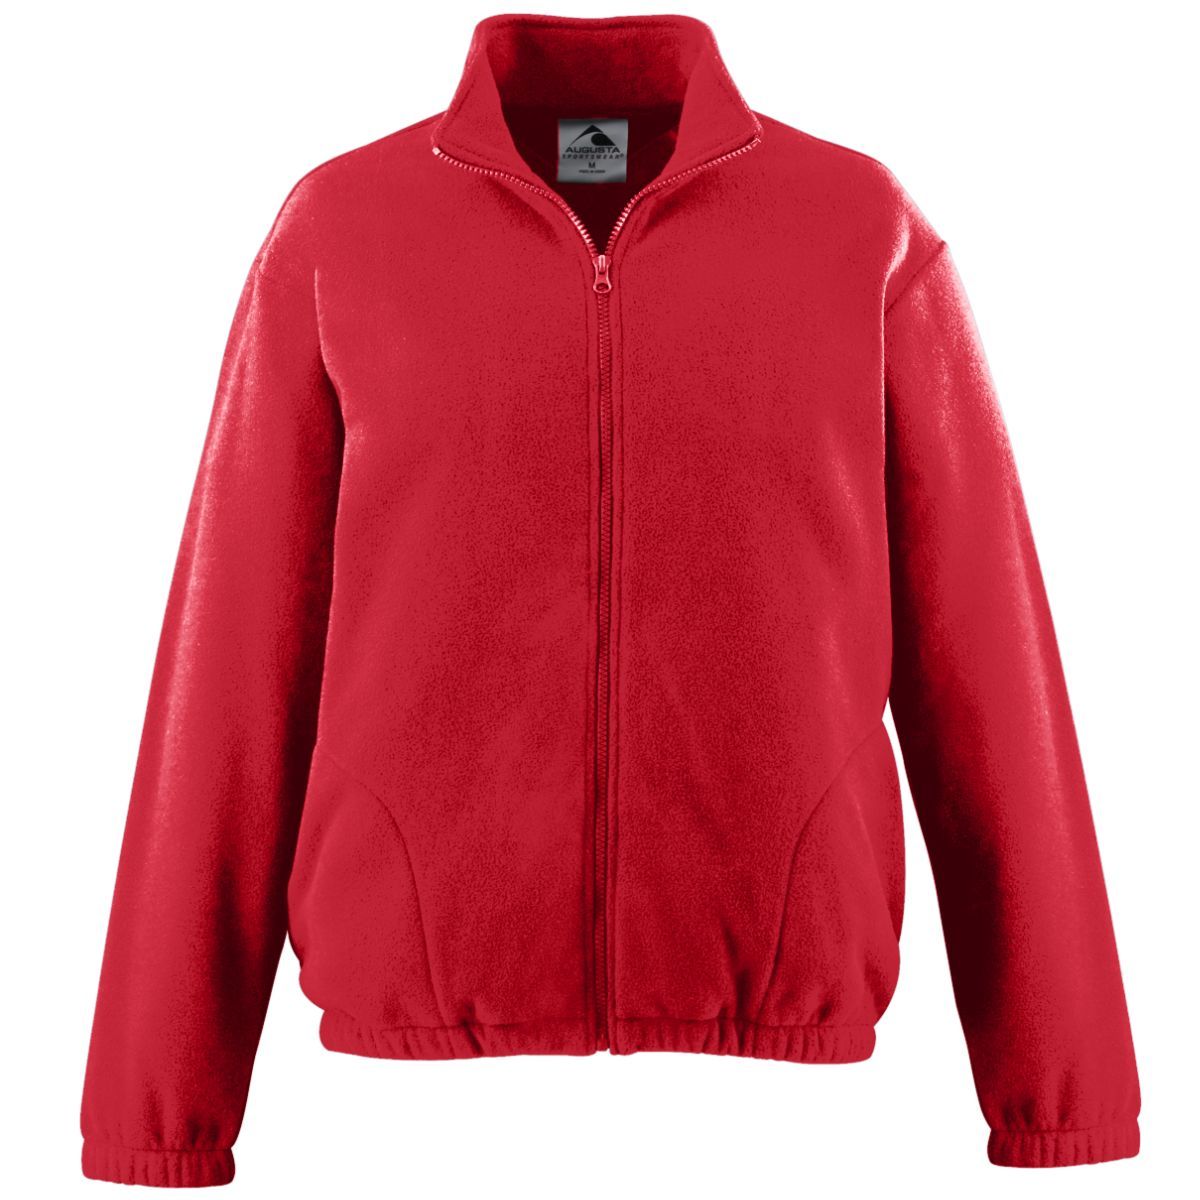 Augusta Sportswear Youth Chill Fleece Full Zip Jacket in Red  -Part of the Youth, Youth-Jacket, Augusta-Products, Outerwear product lines at KanaleyCreations.com